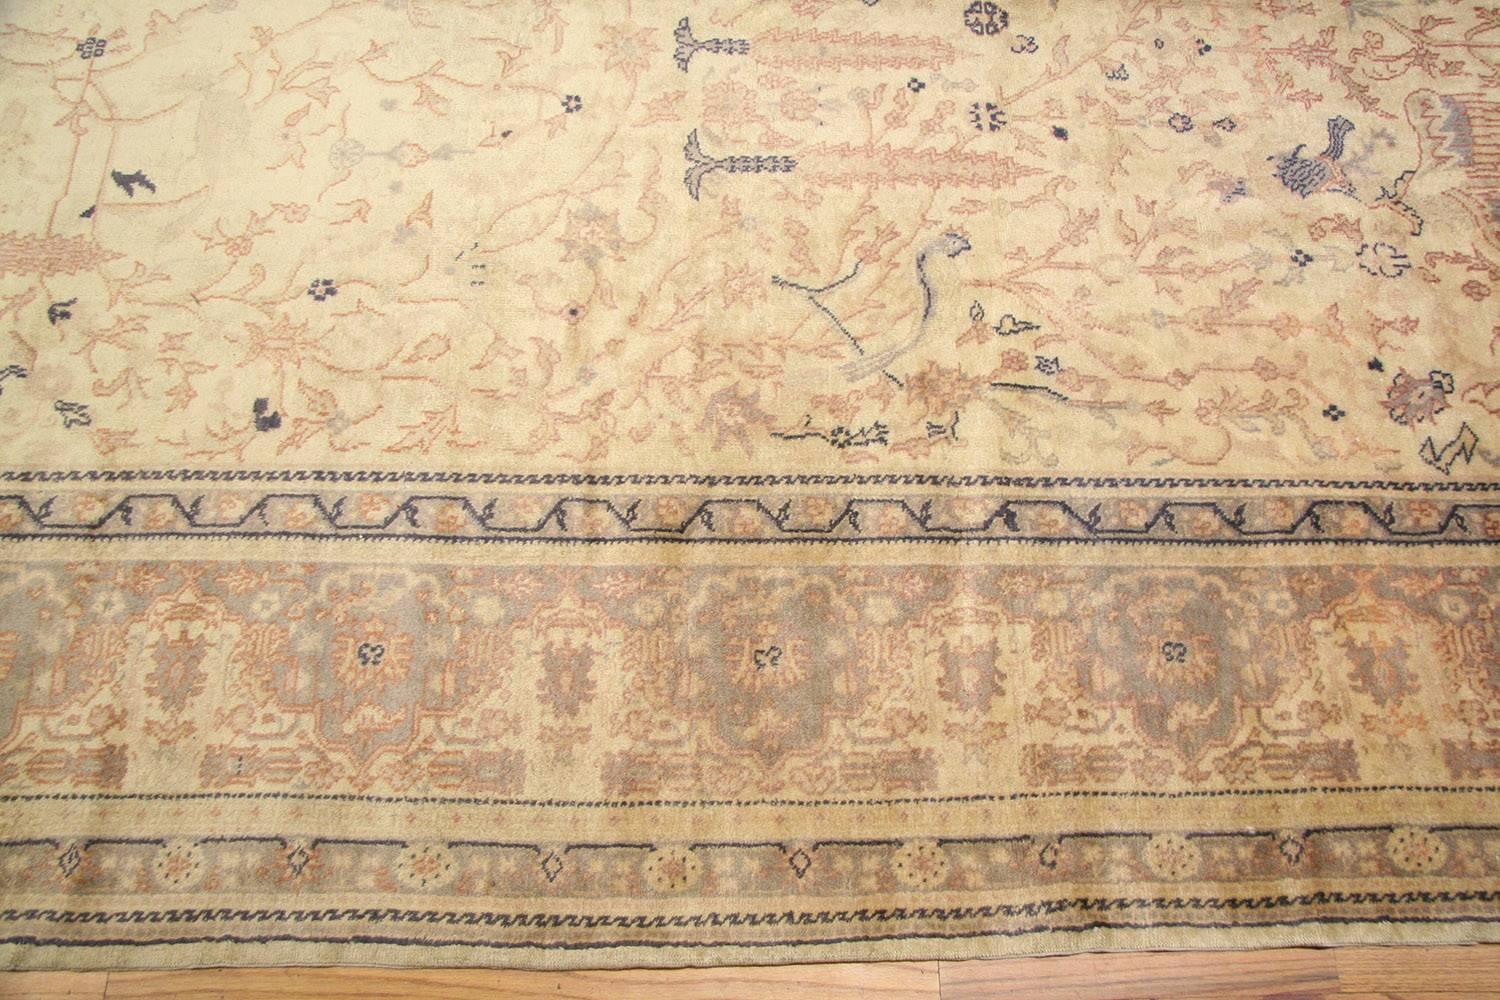 Hand-Knotted Antique Turkish Sivas Rug. Size: 12 ft 4 in x 19 ft 4 in (3.76 m x 5.89 m)